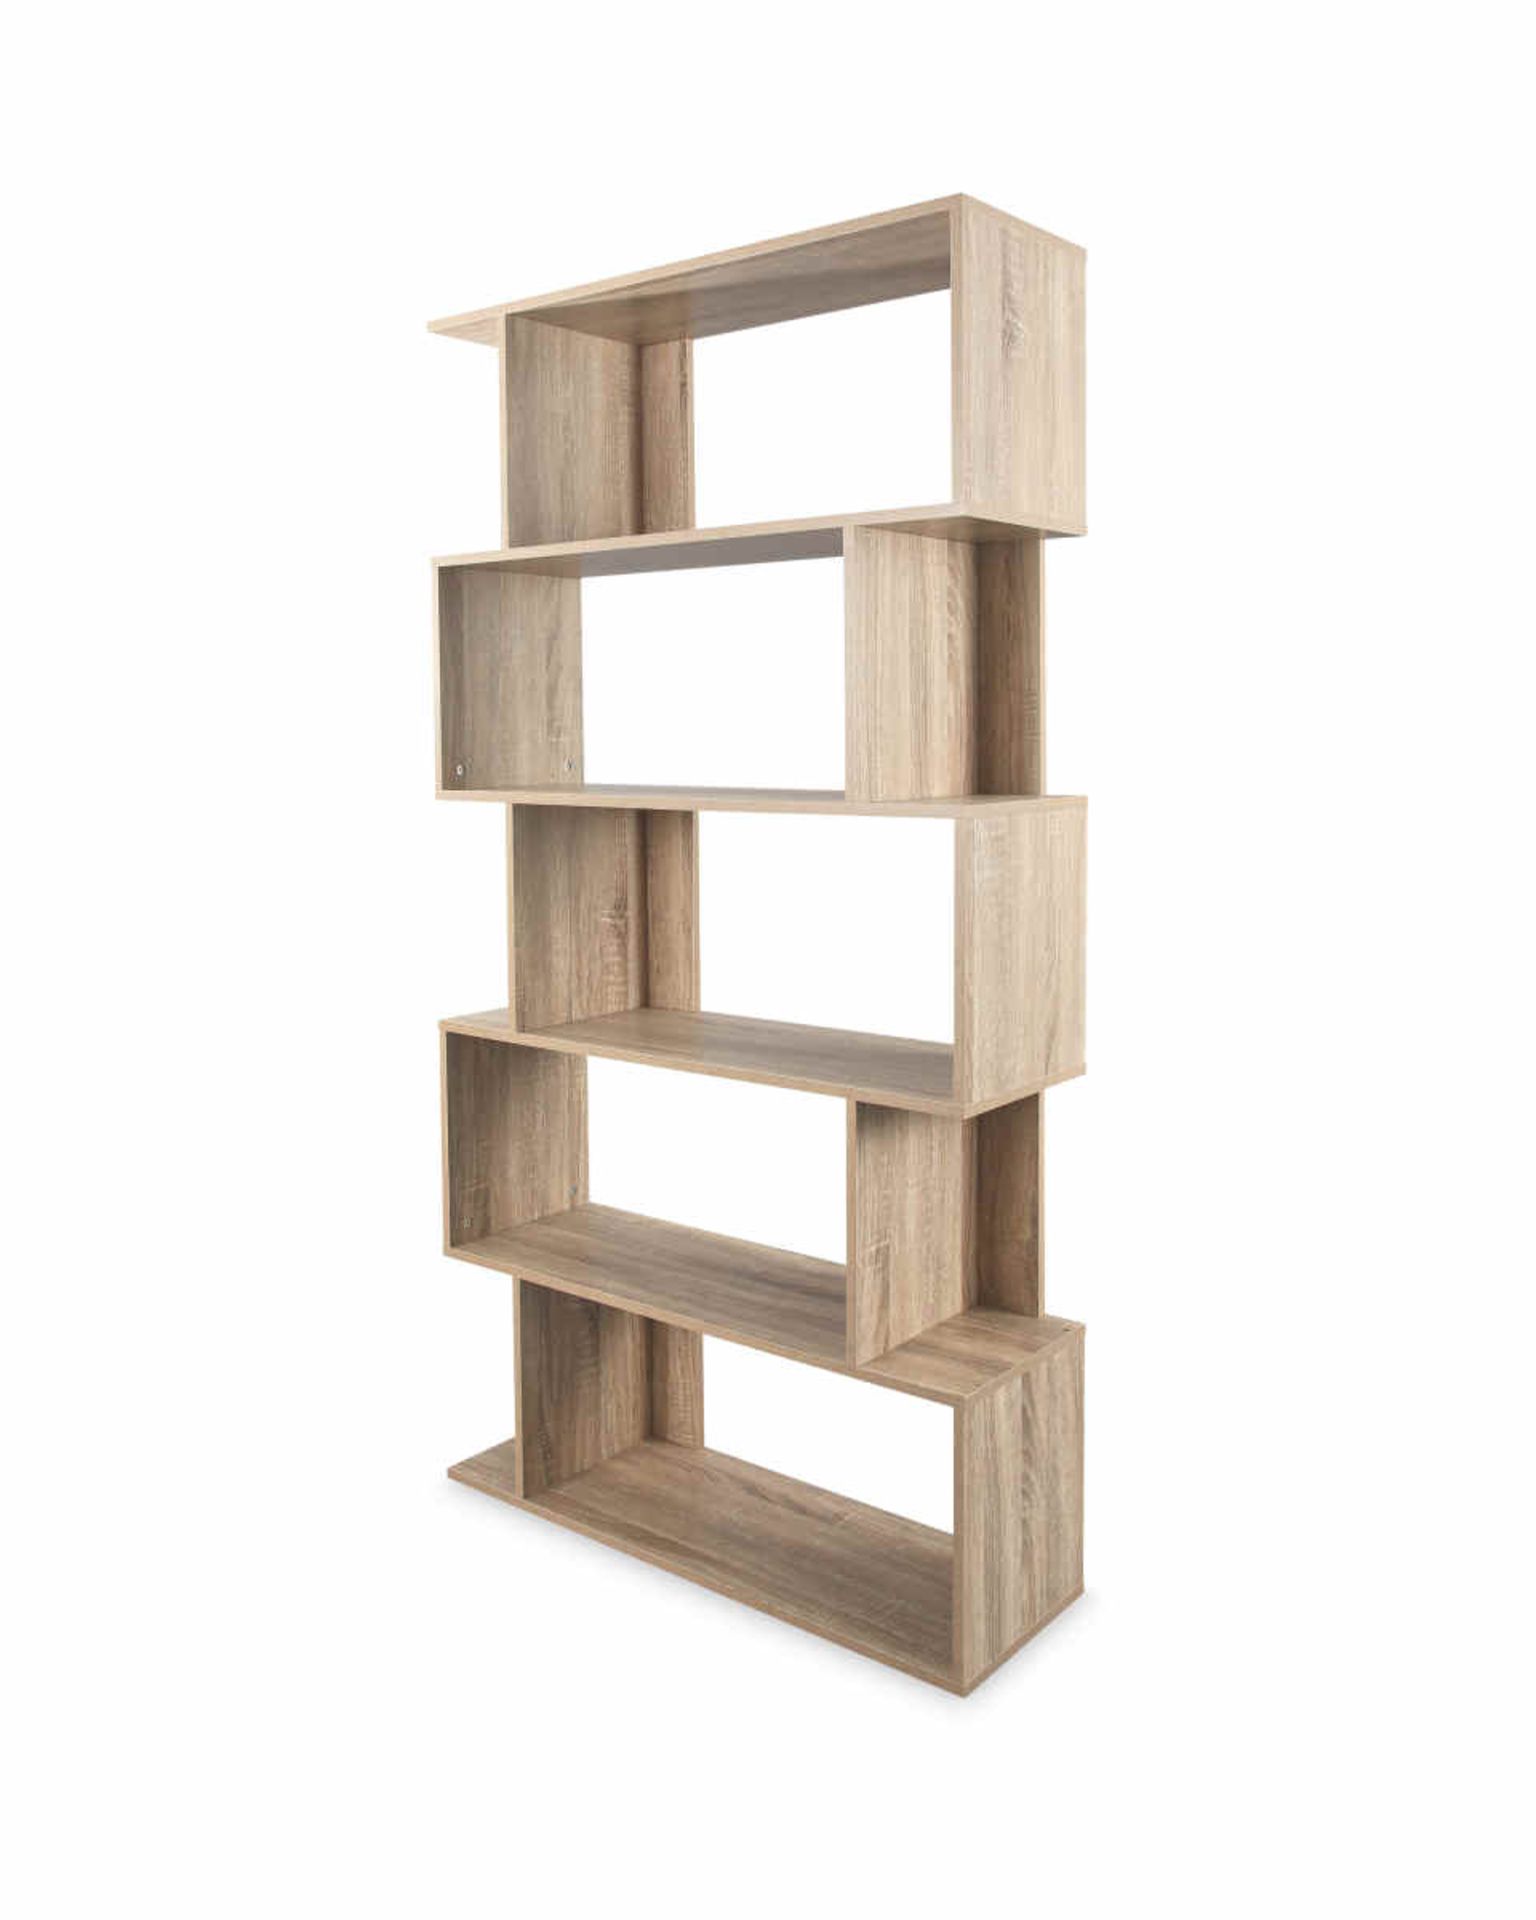 Kirkton House Bookcase Shelving Unit. Add a touch of modern luxury to your home with the Kirkton